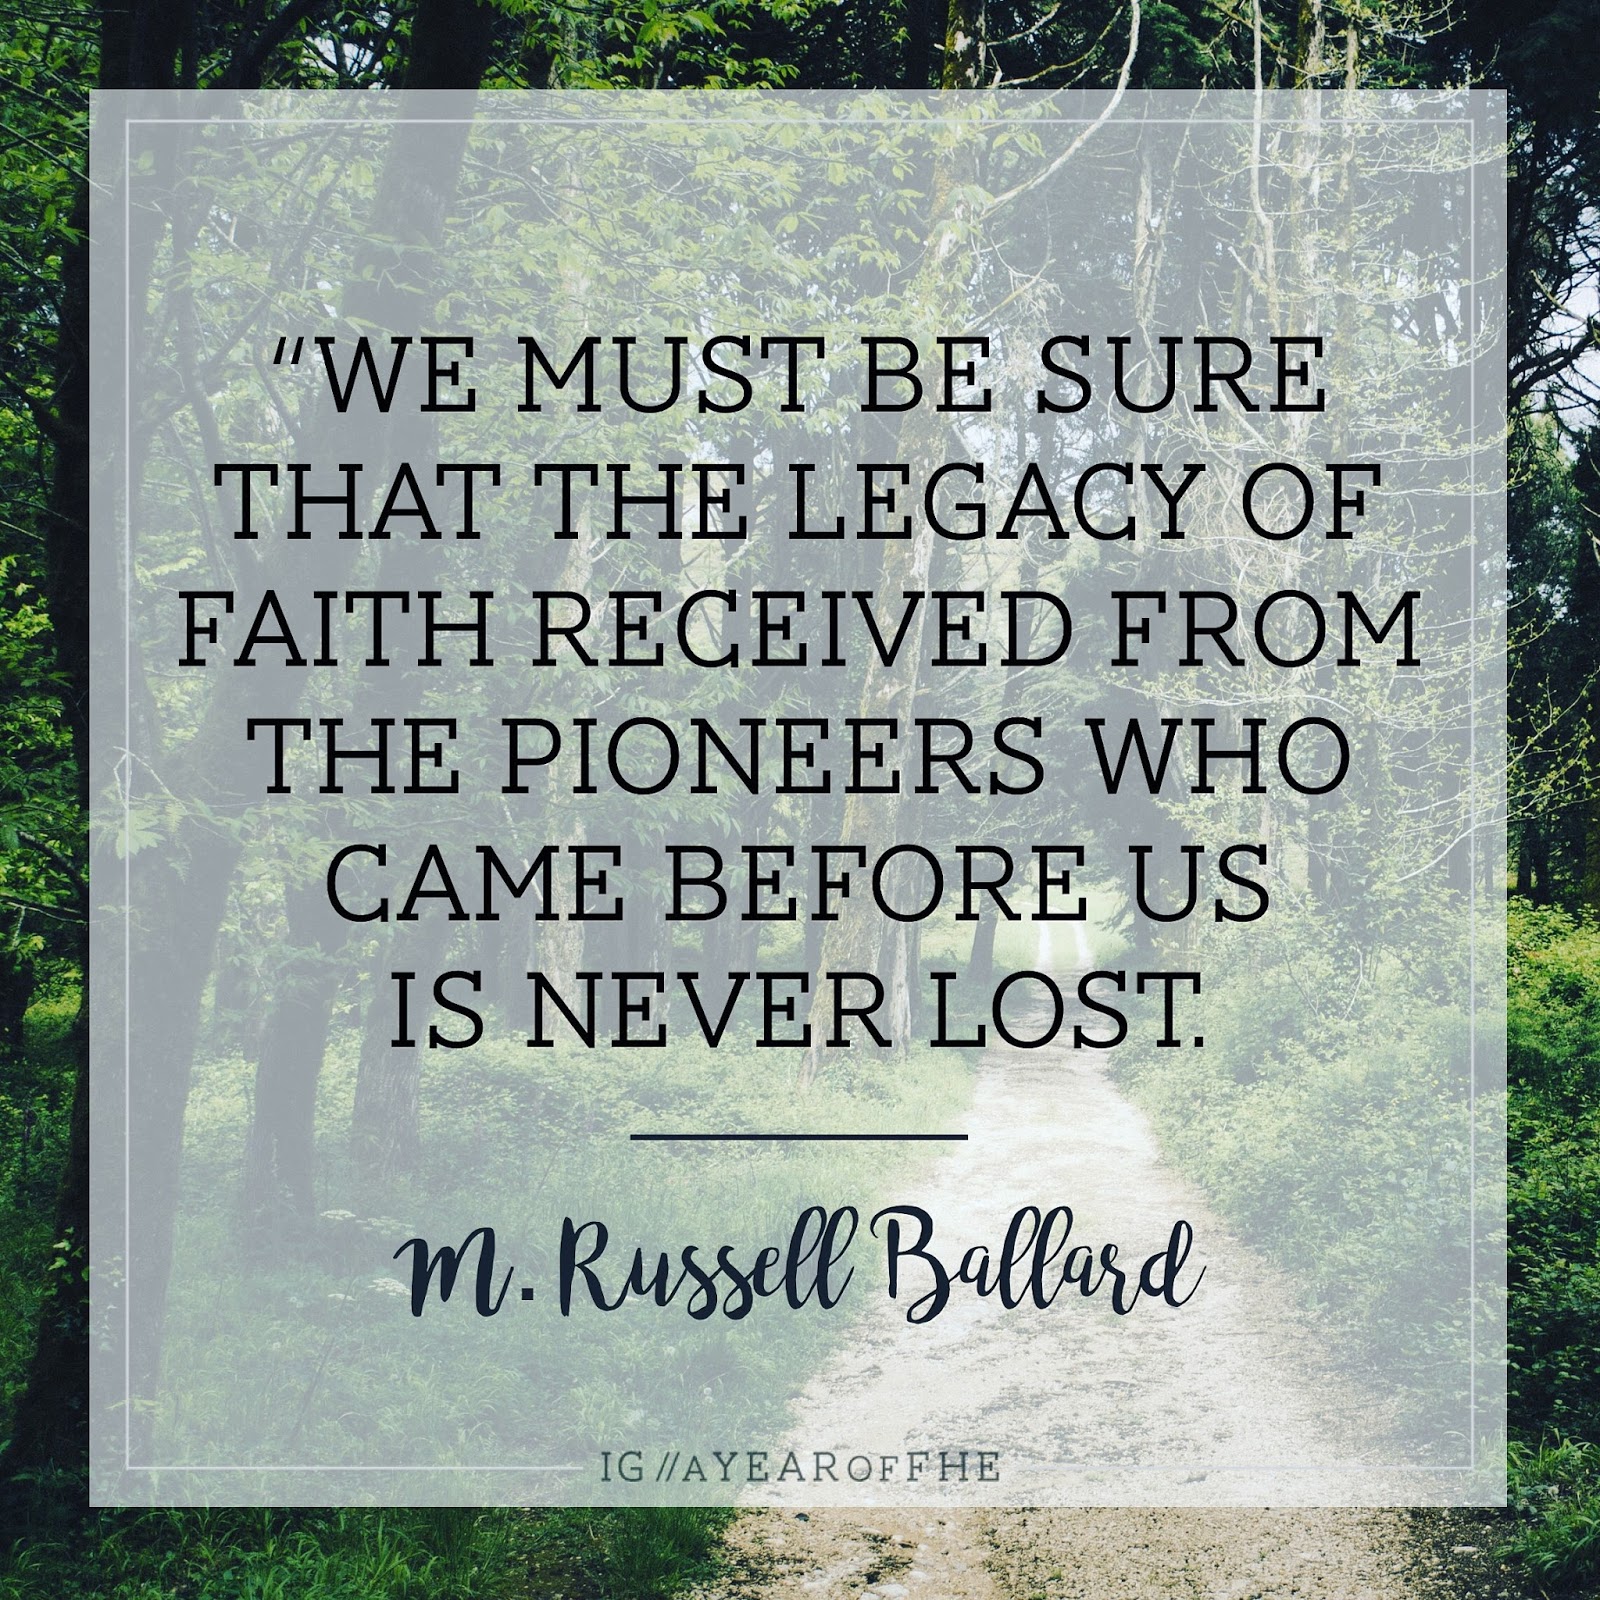 A Year of FHE // This is a great collection of 25 quotes from LDS leaders about the Mormon Pioneers that will uplift and inspire to modern Latter-day Saints. #lds #pioneers #trek